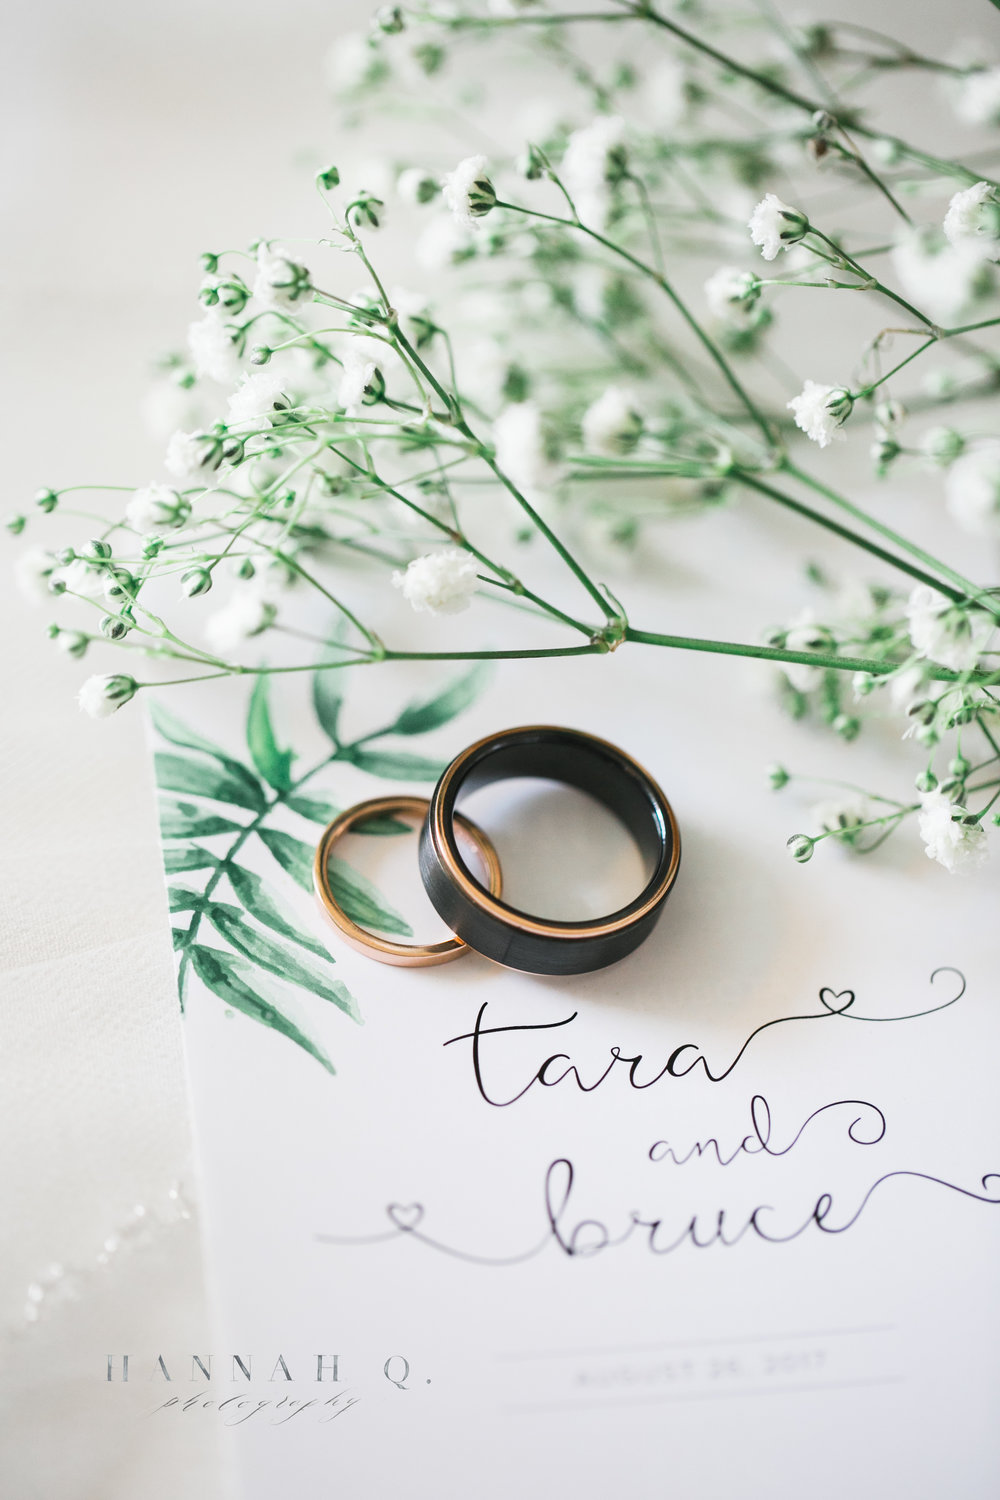 I love our Tara + Bruce added touches of green and foliage to their wedding day.